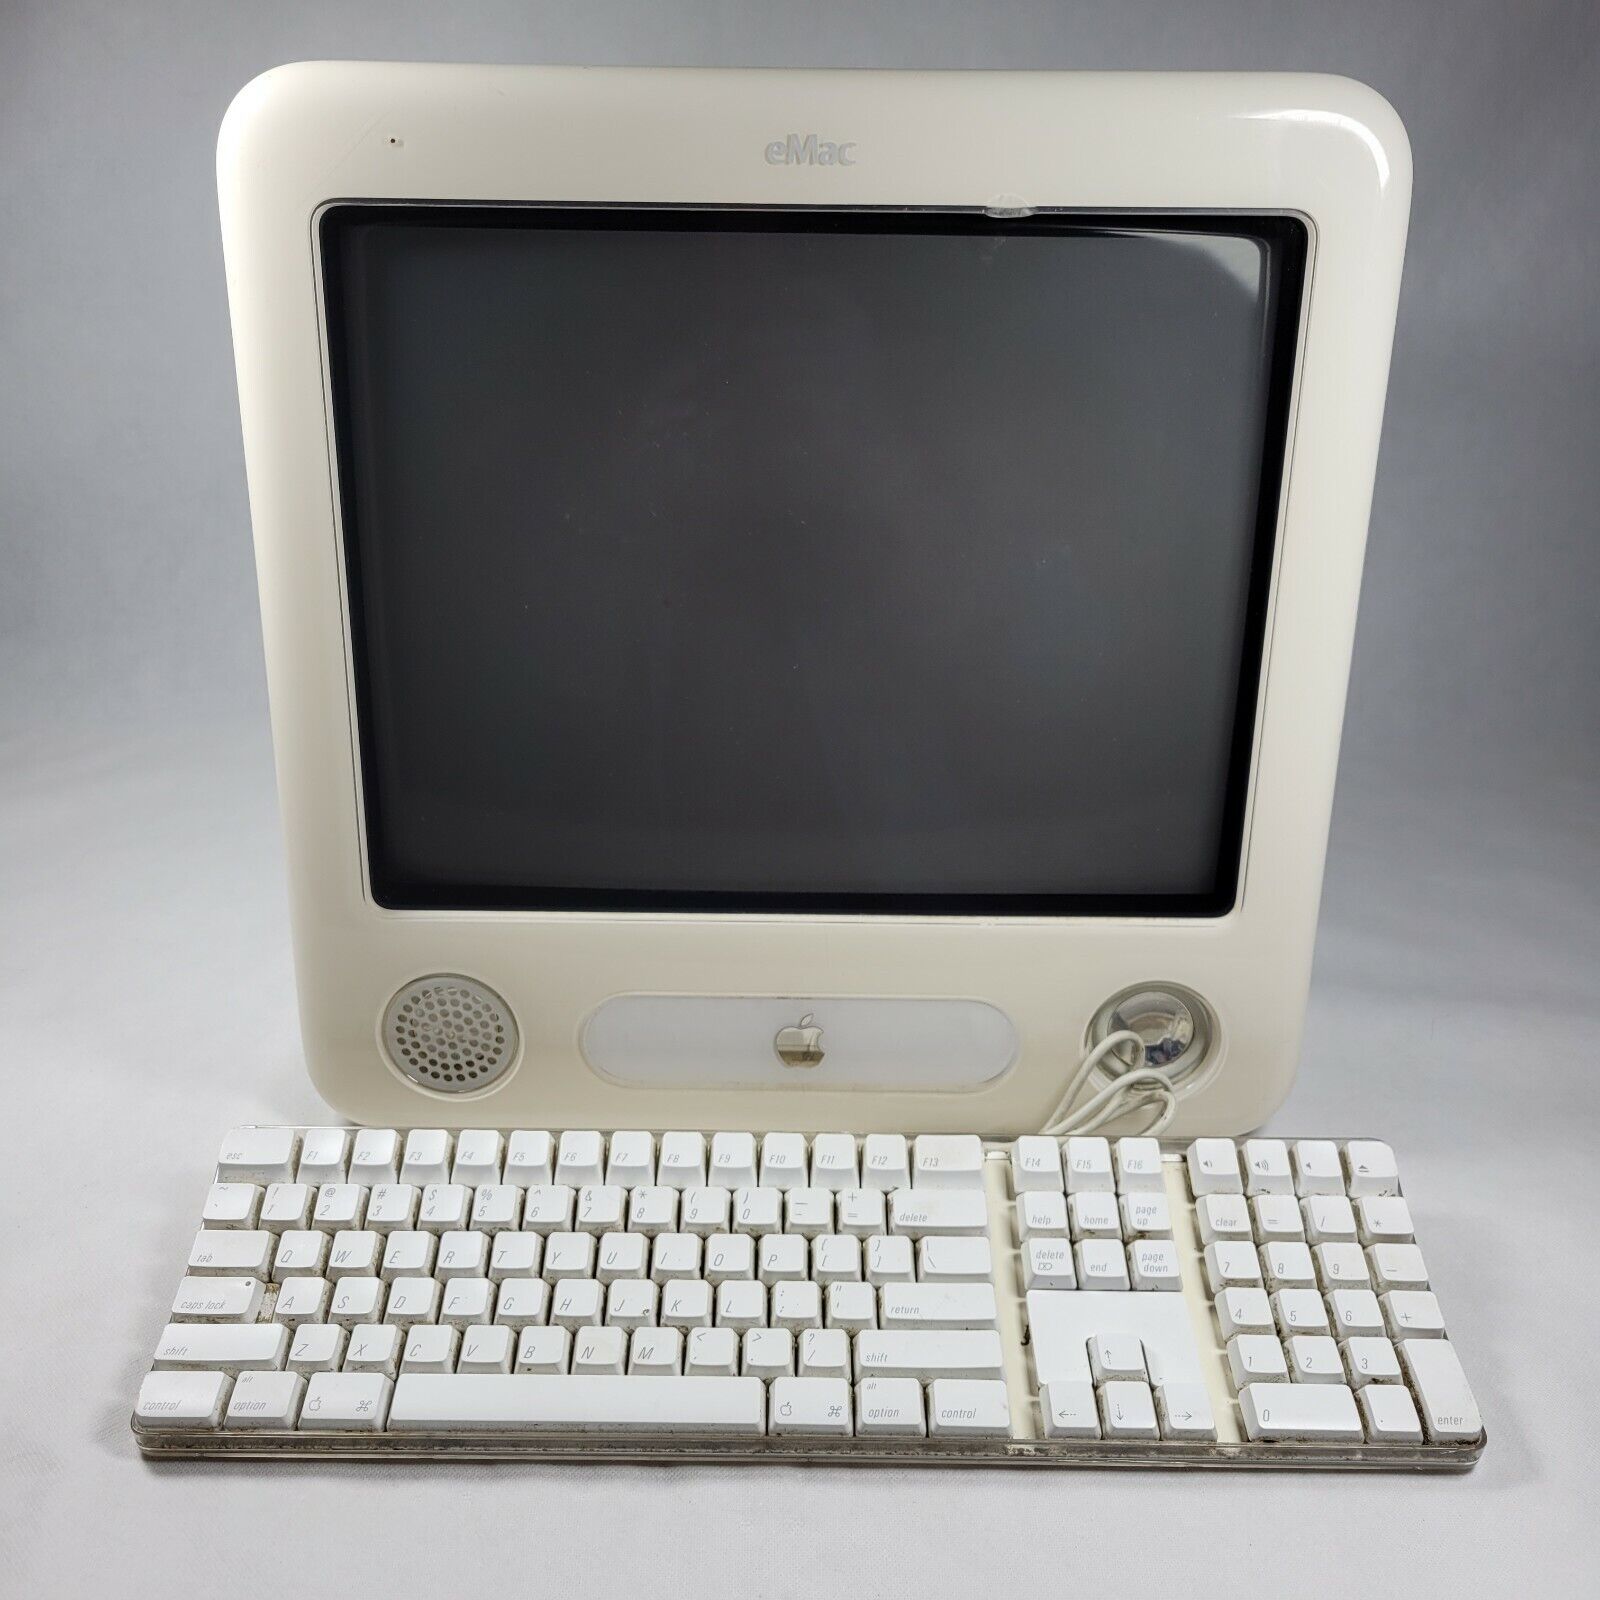 Apple eMac A1002 2002 EMC-No. 1903 Working May need update As Is